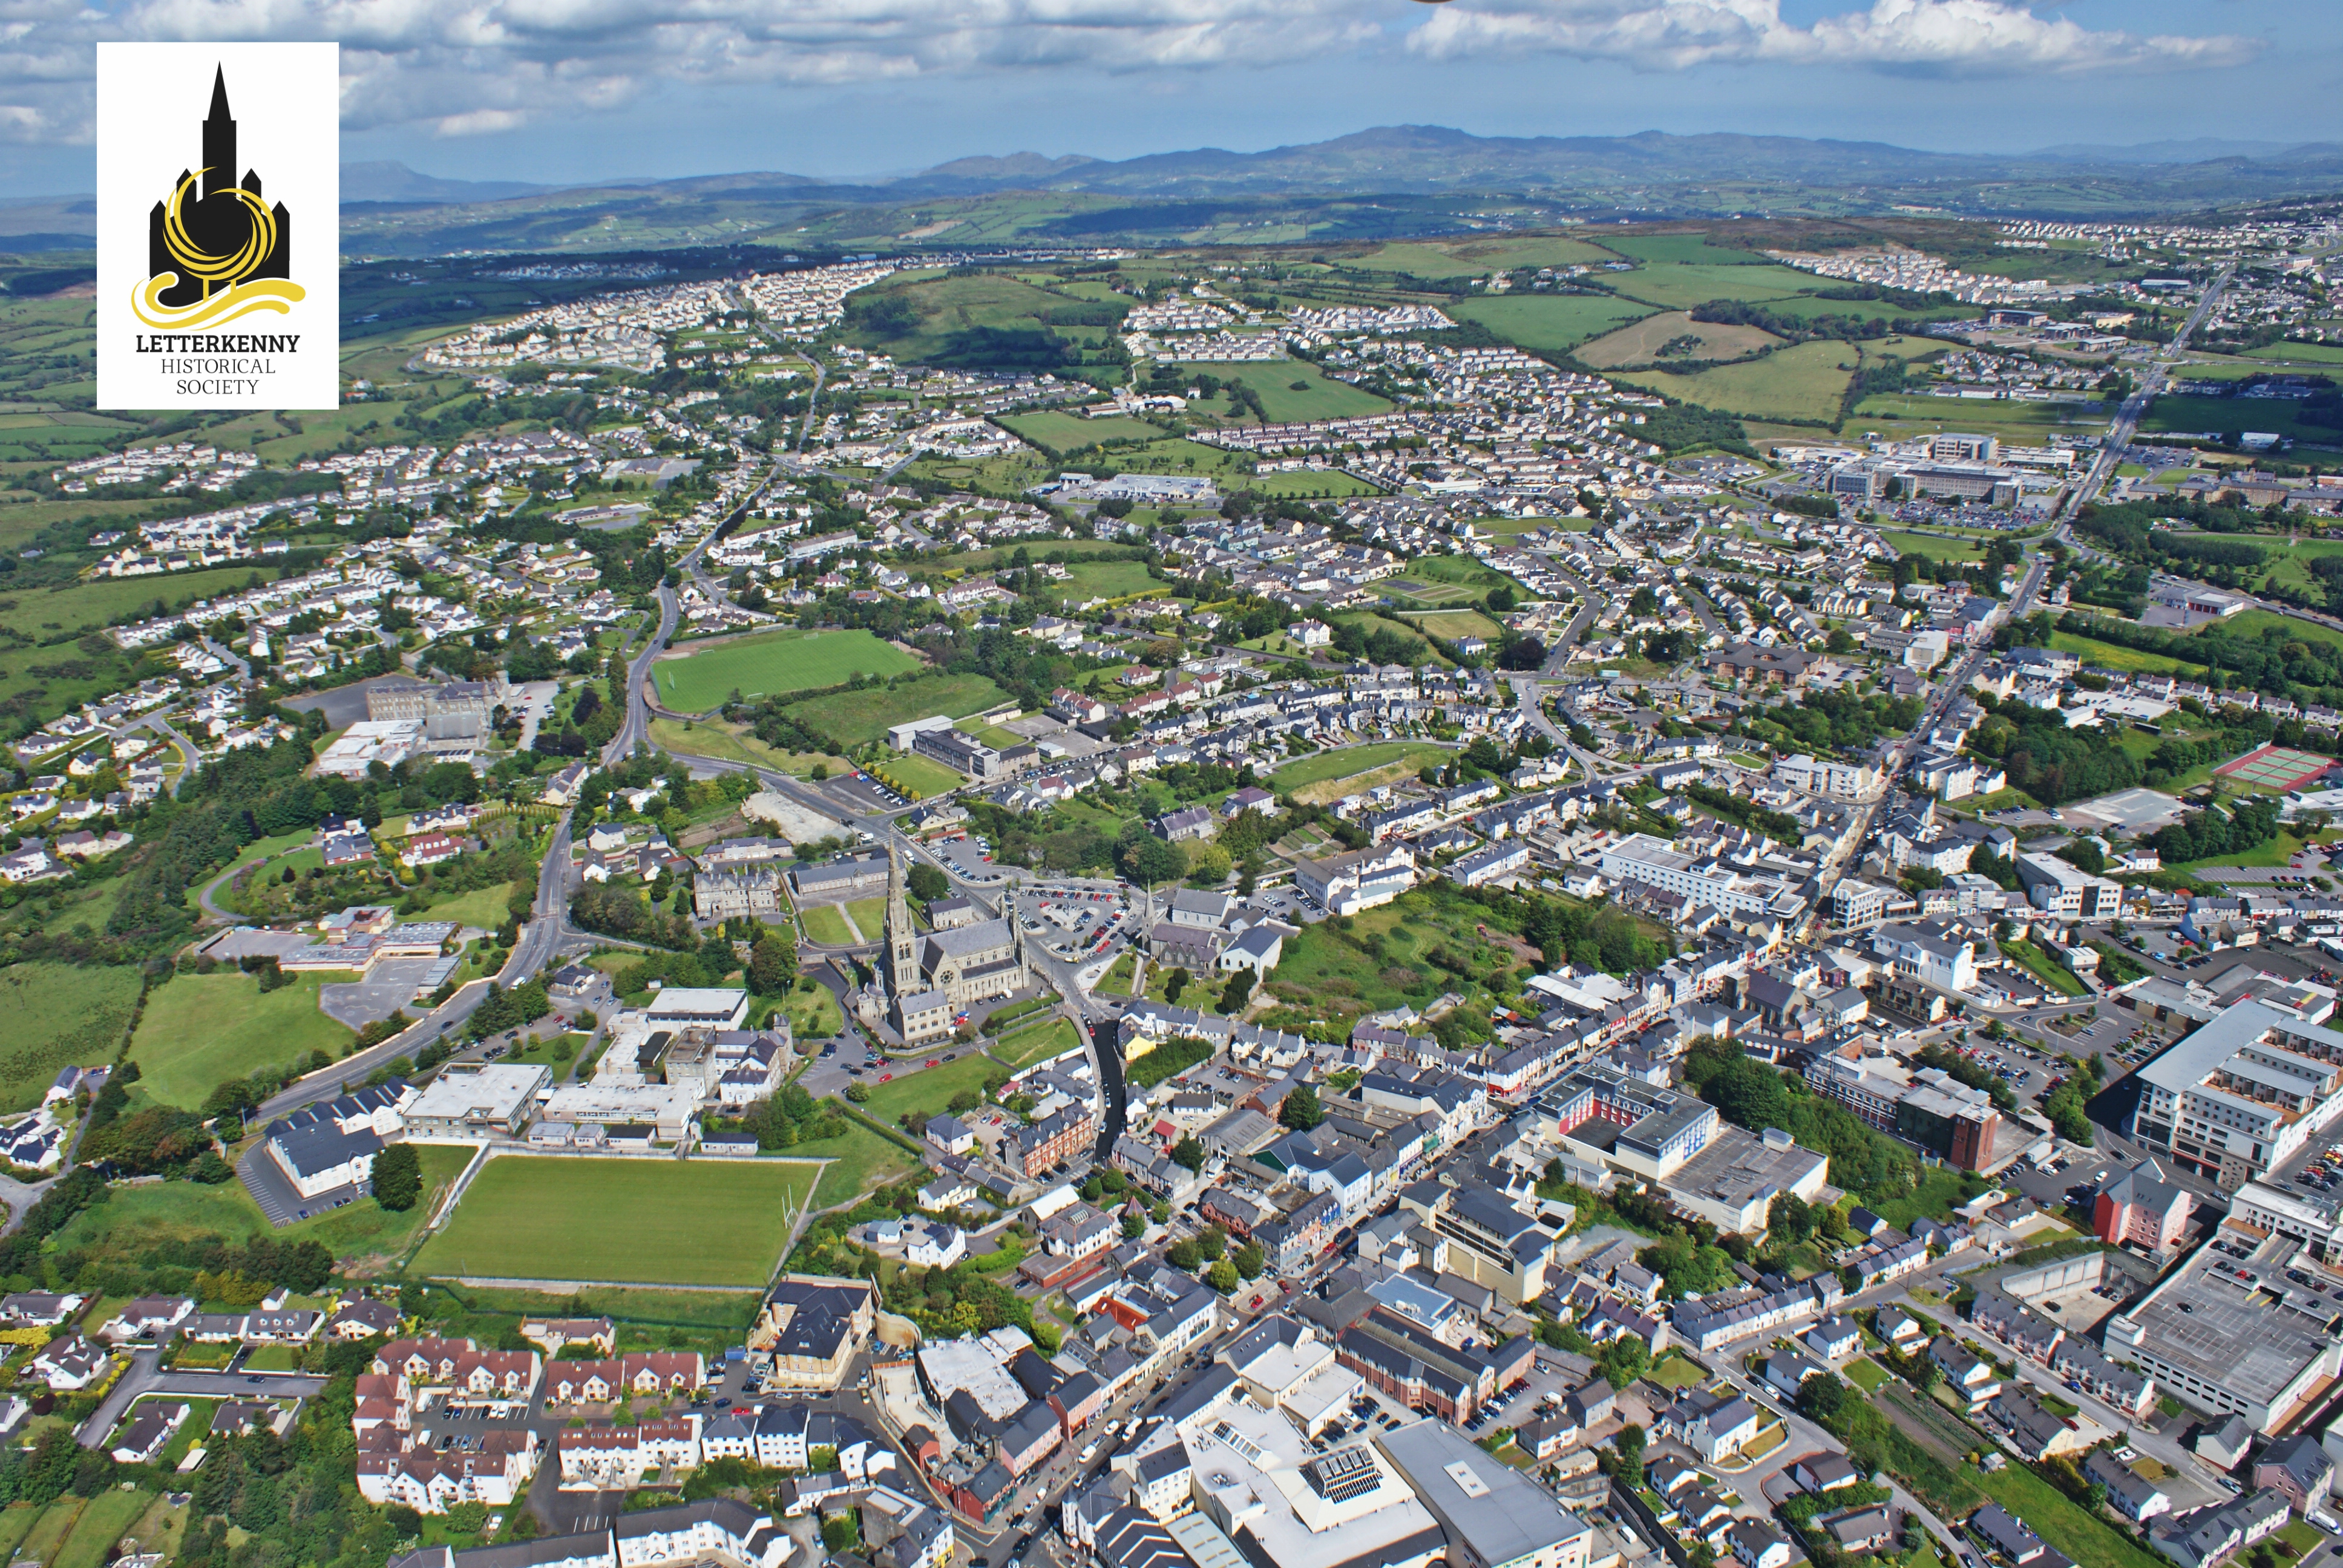 Aerial view of Letterkenny 2011